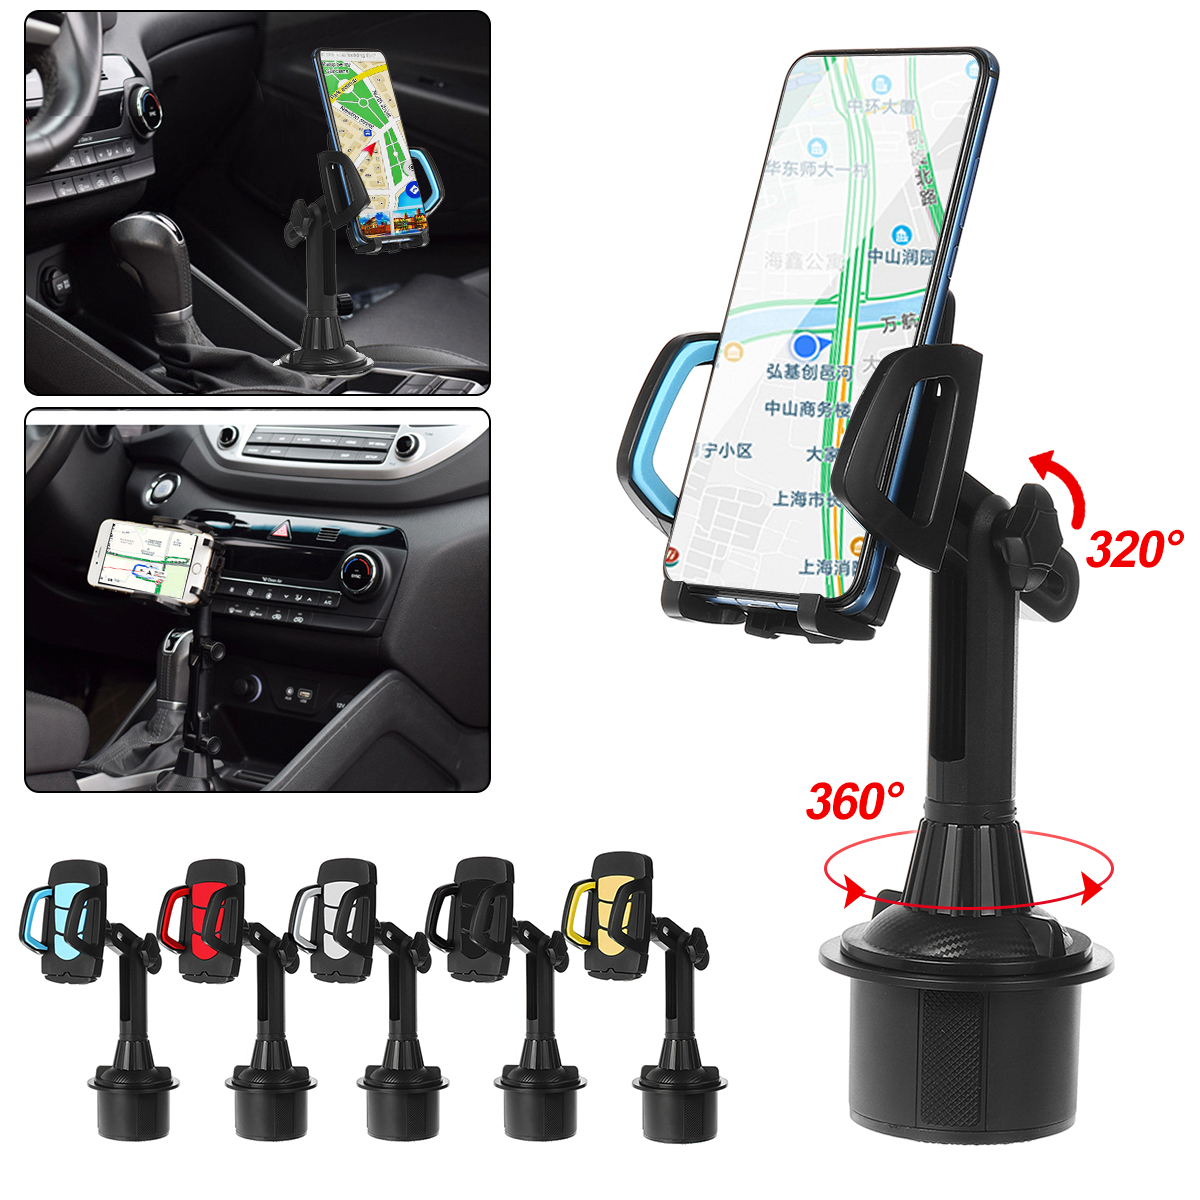 Bakeey-Car-Mount-360deg-Adjustable-Cup-Holder-Cradle-for-iPhone-12-for-Samsung-Galaxy-Note-20-ultra--1778684-4